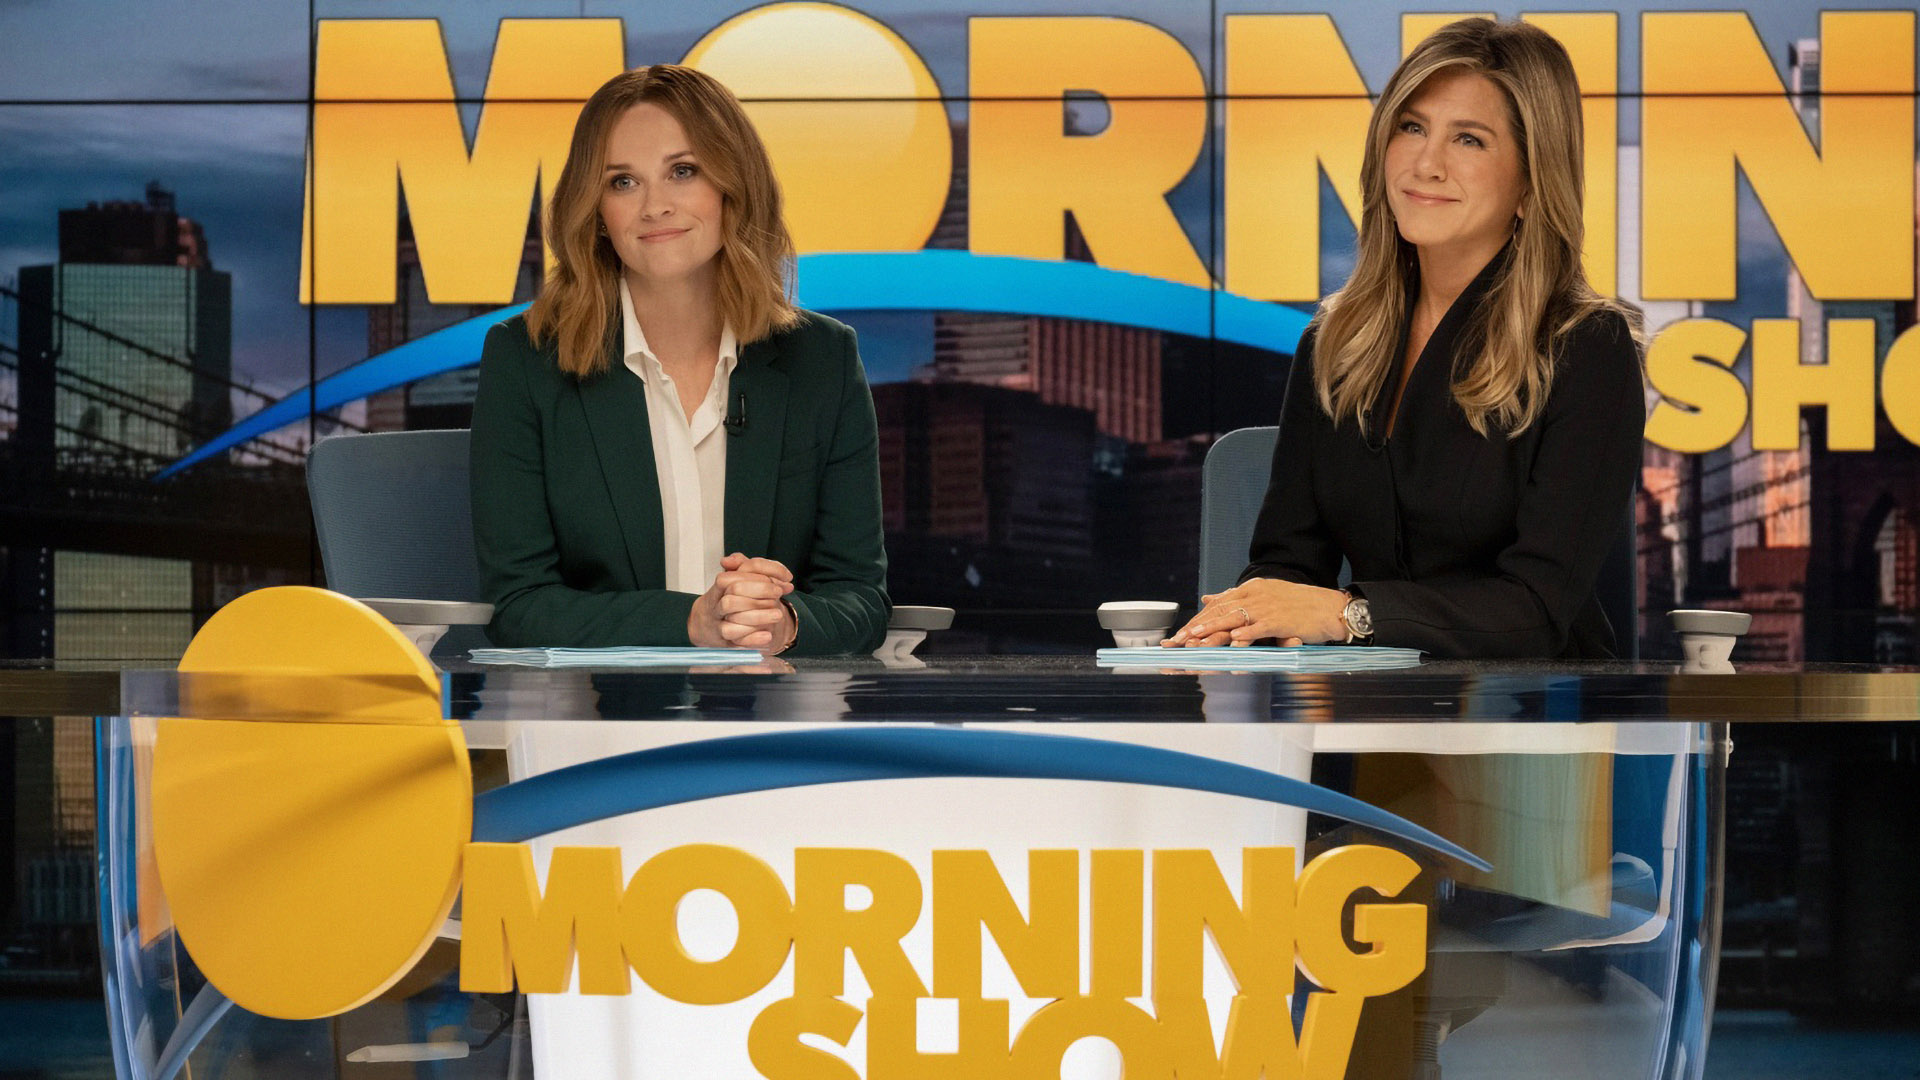 The Morning Show Fans Might Not Like Season 4, Executive Warns